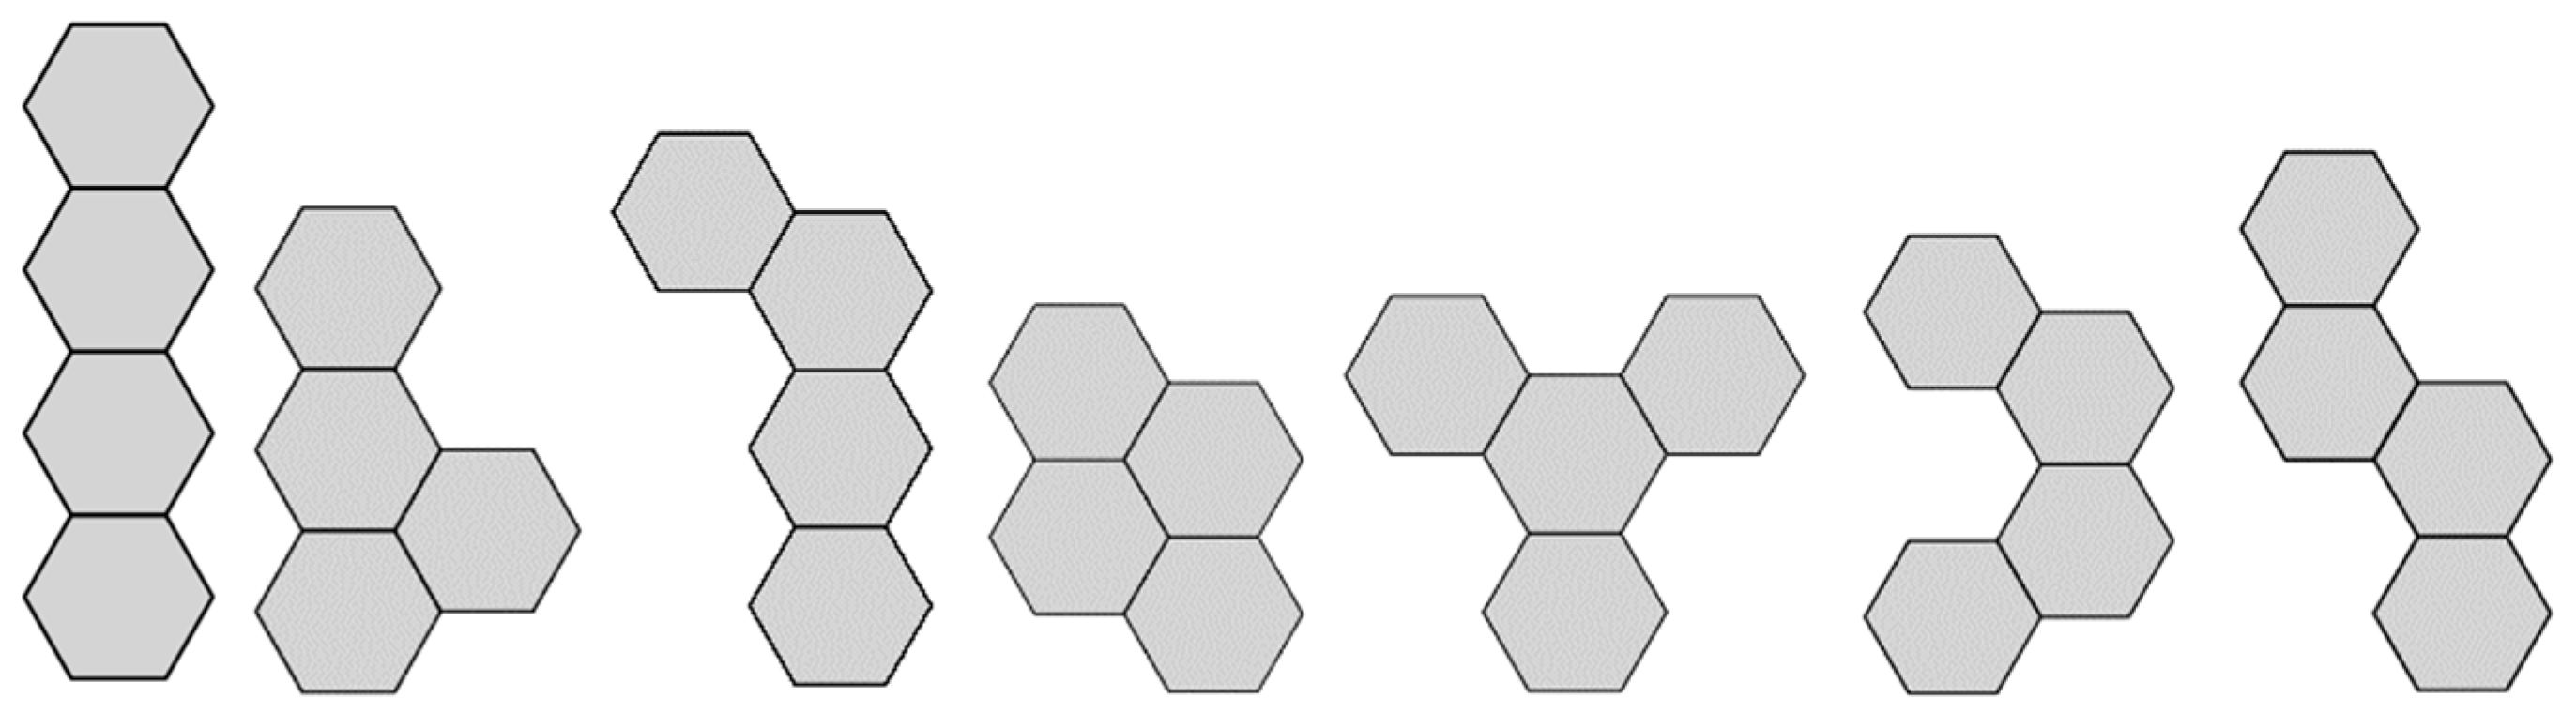 Hexagons are the most scientifically efficient packing shape, as bee  honeycomb proves.